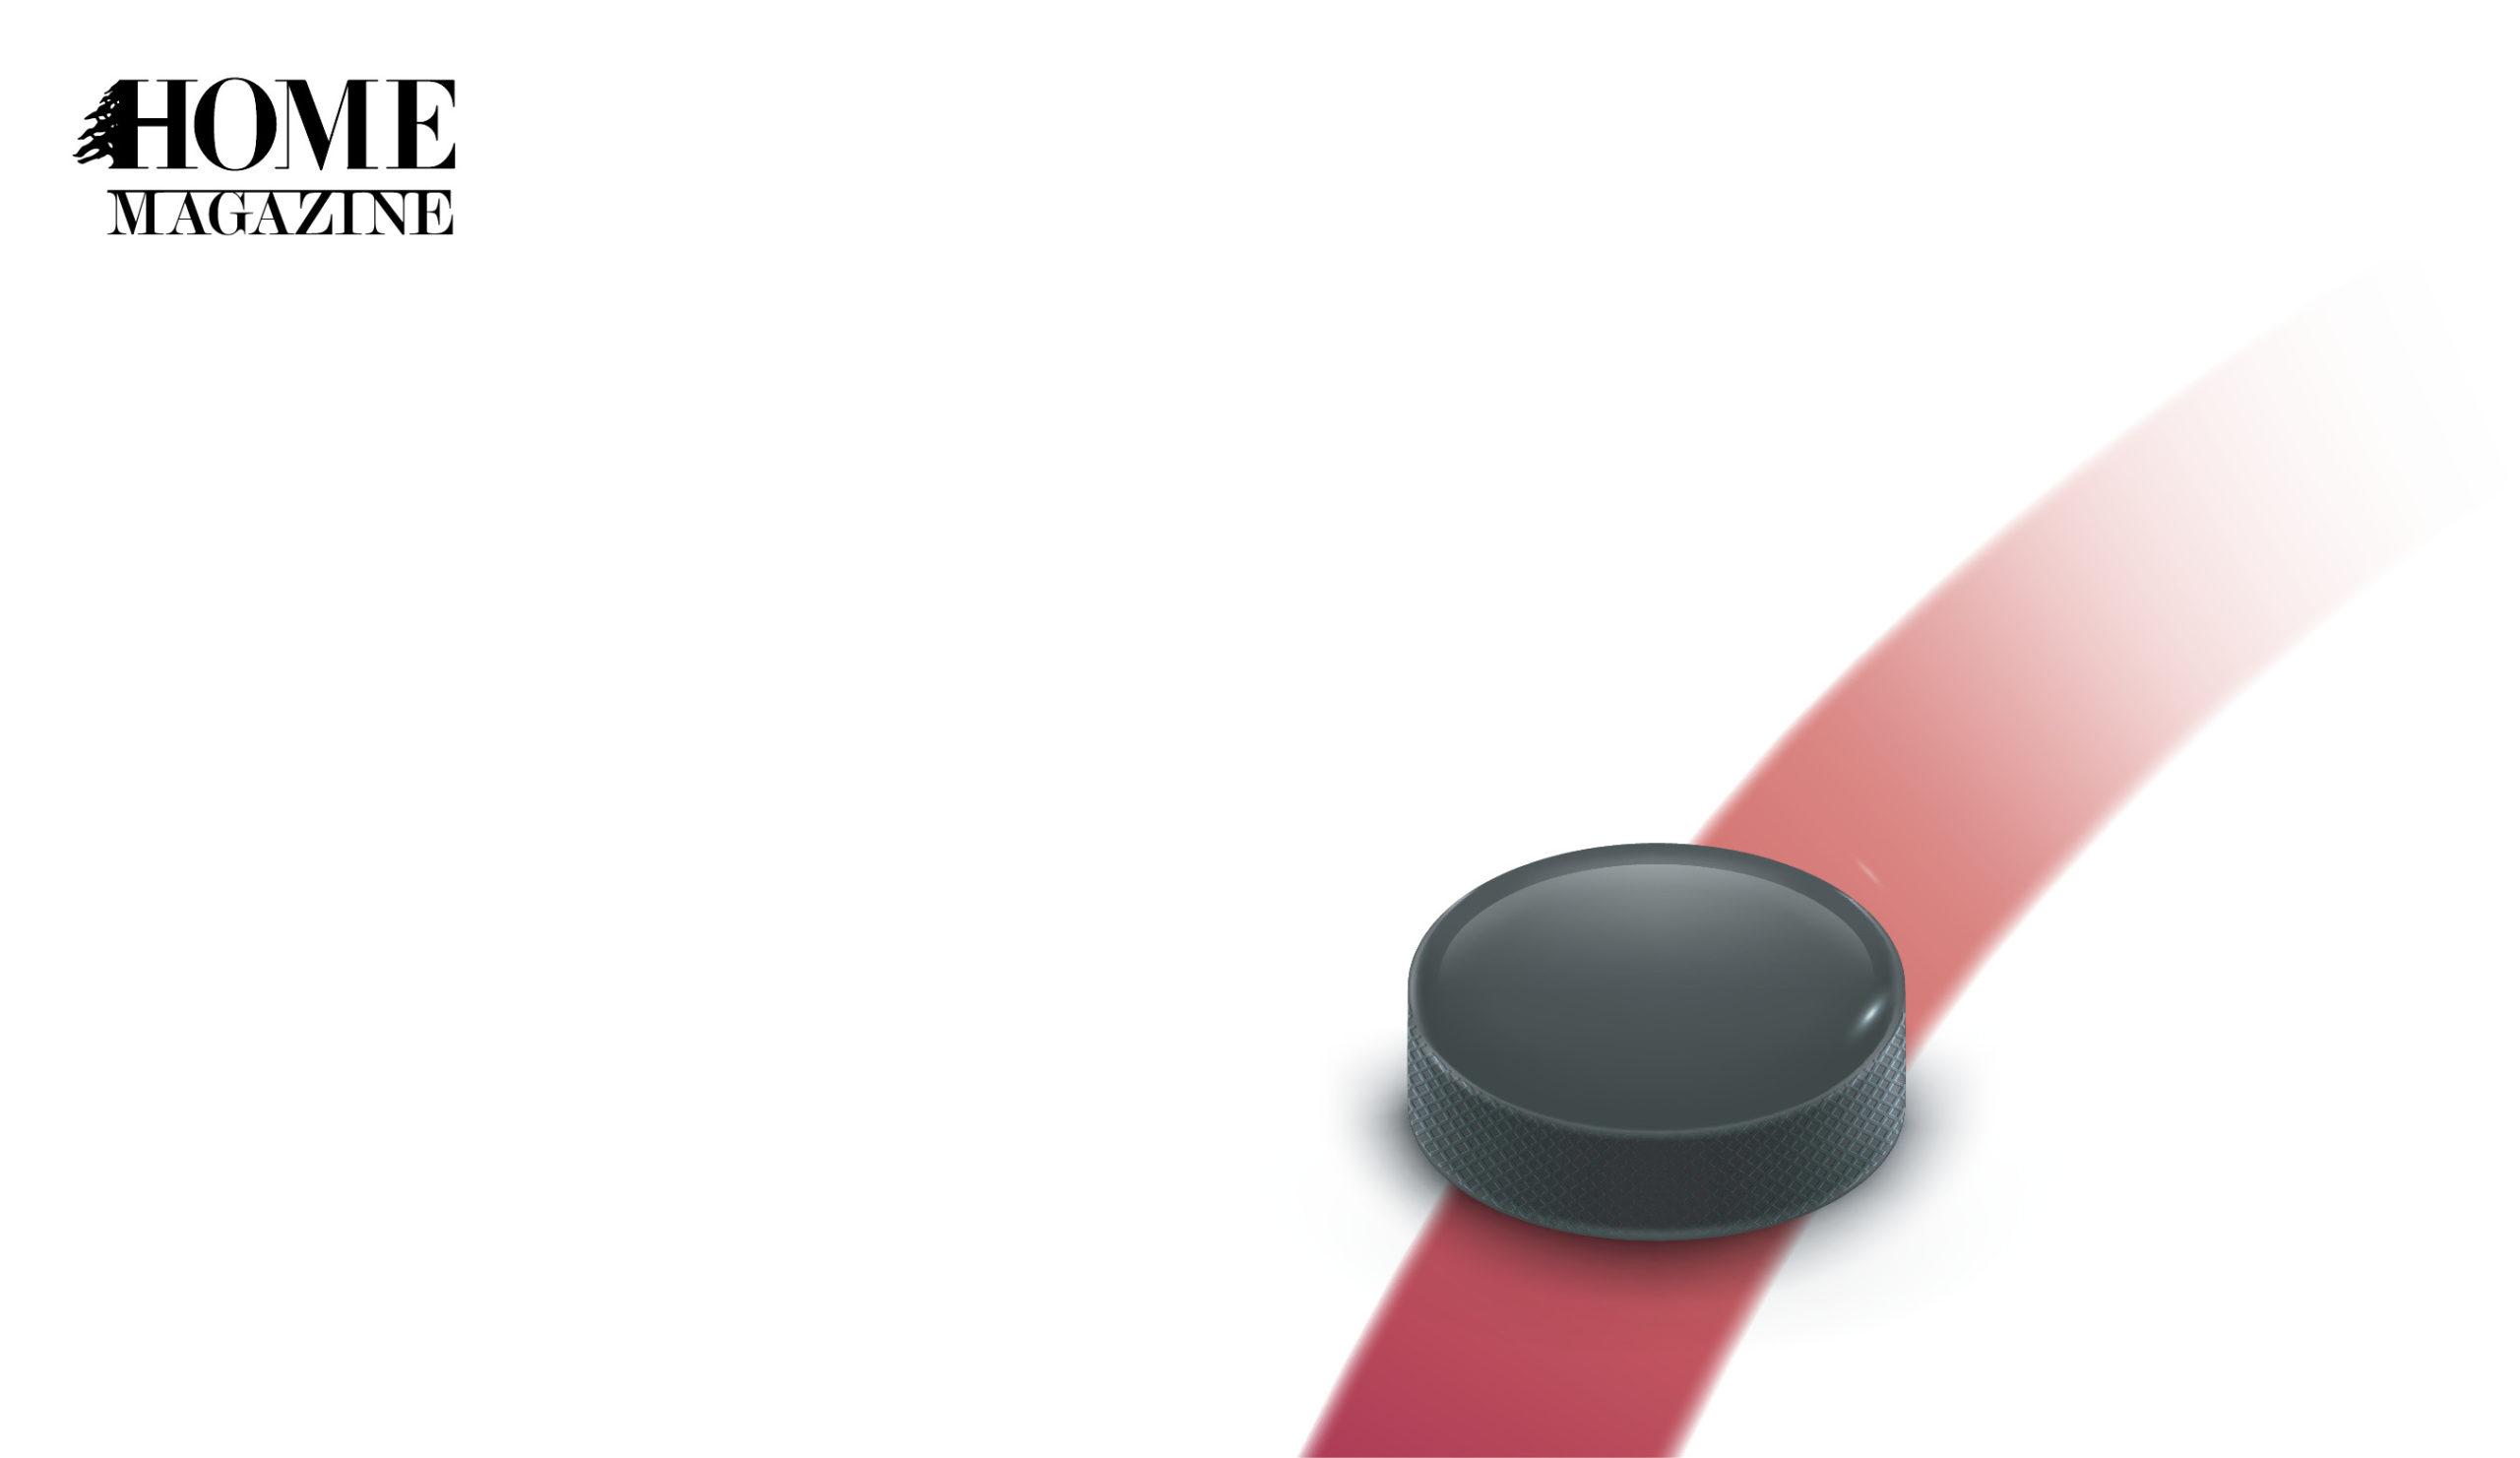 Illustration of black circled object on a red stripe